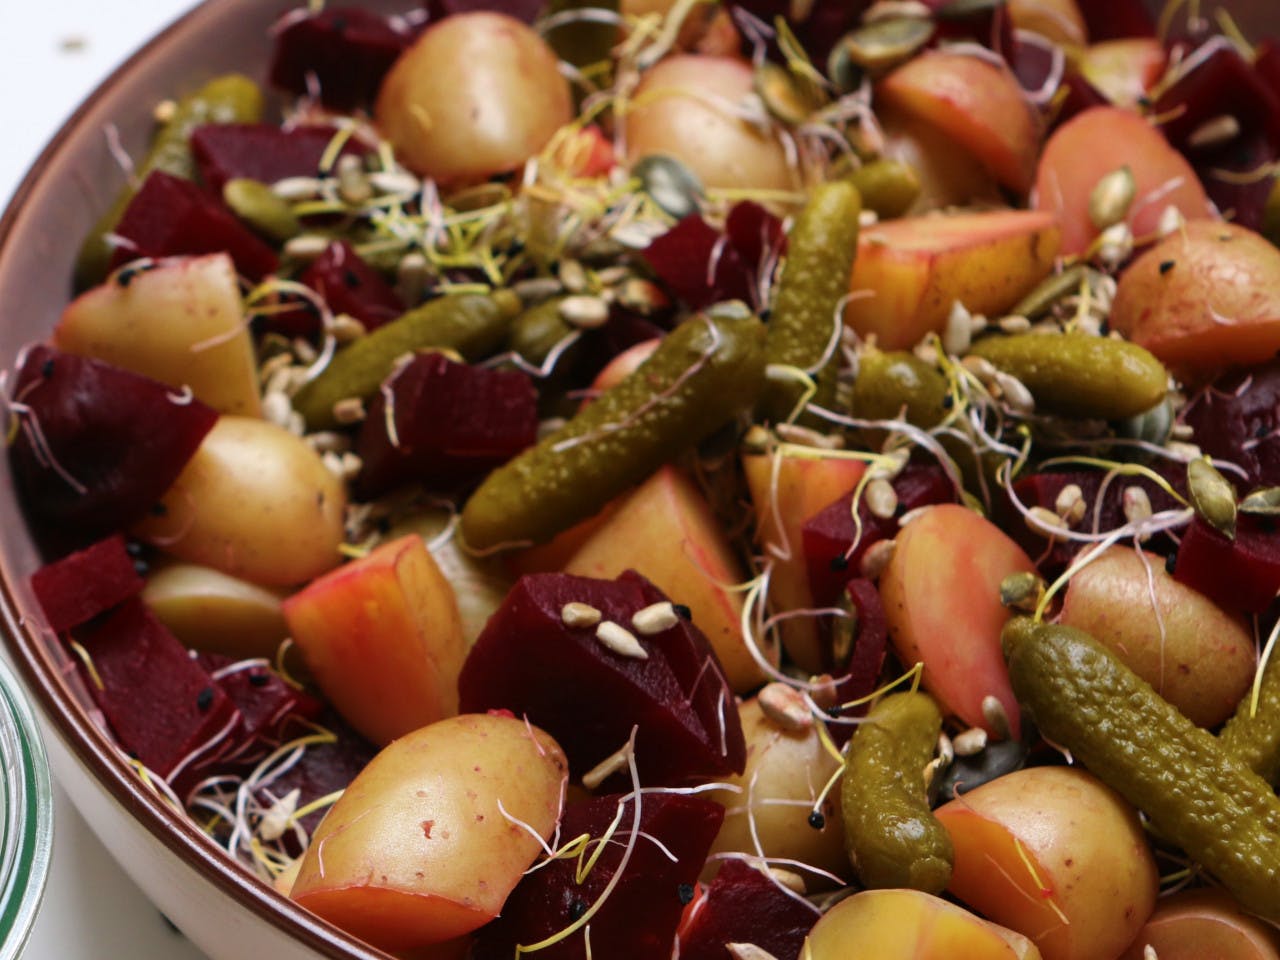 Beetroot salad with baby potatoes